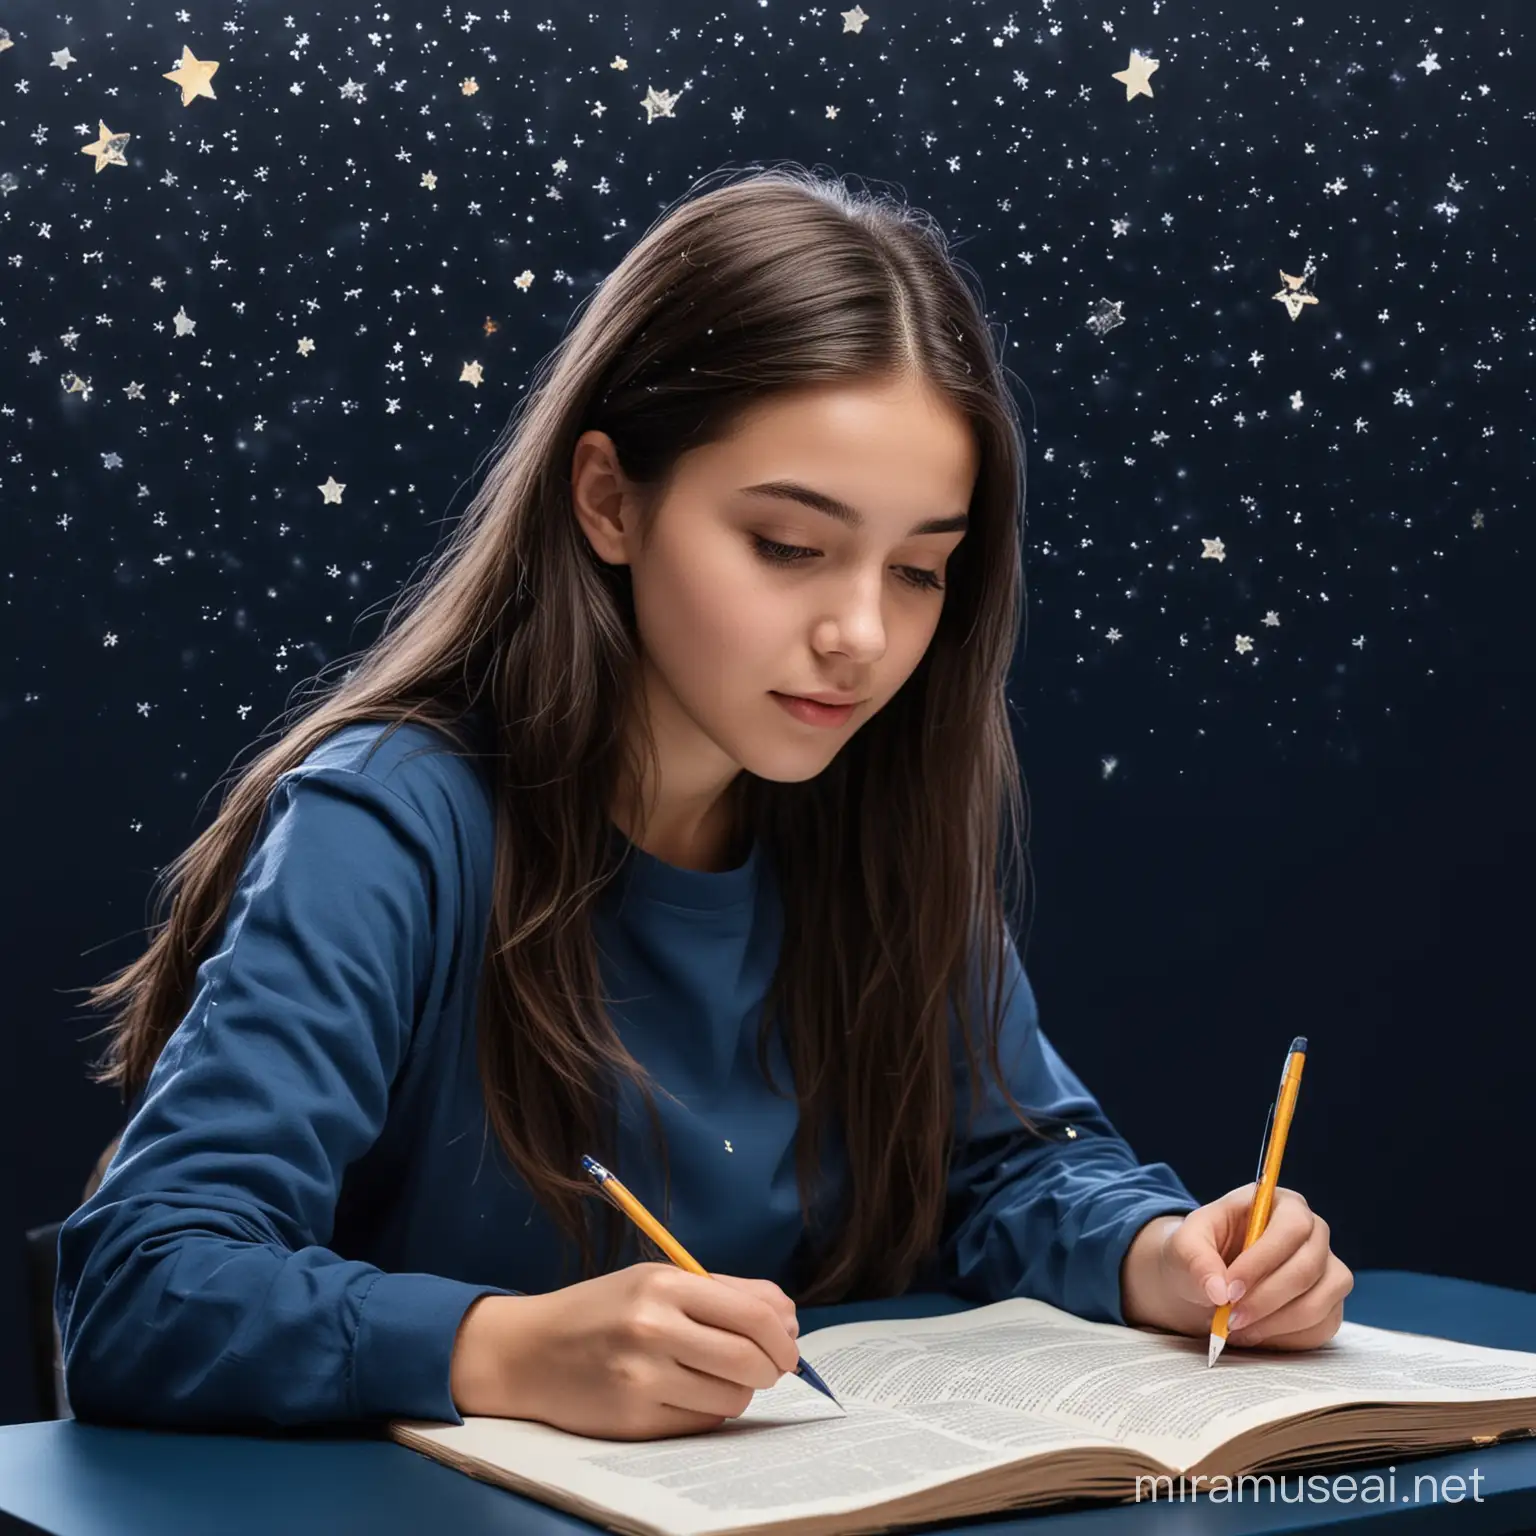 Young Student Studying Under Starlit Night Sky